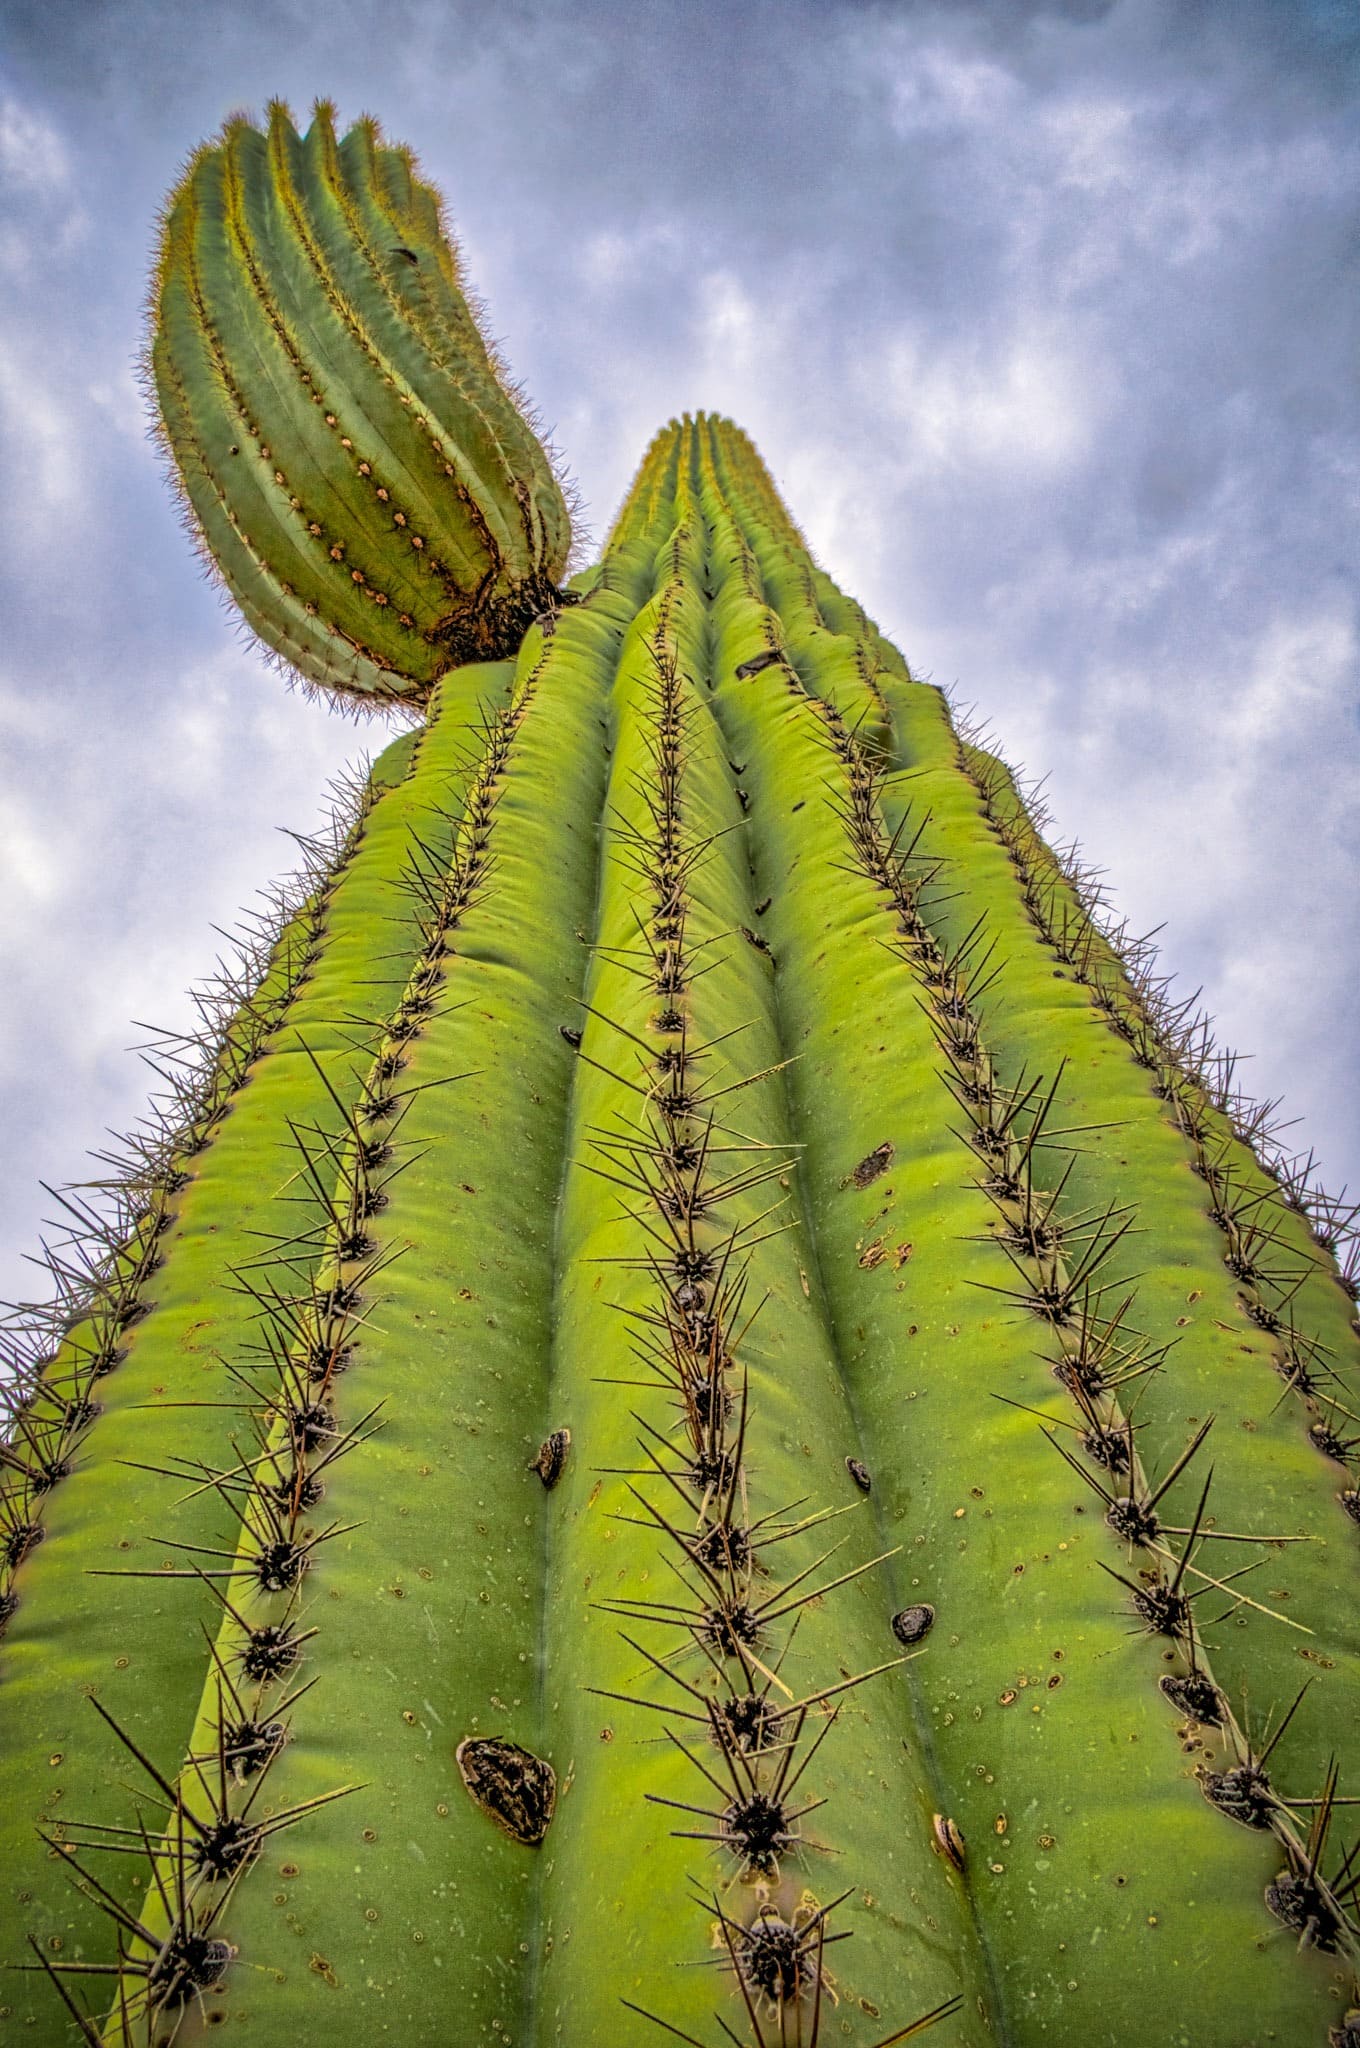 Looking up the side of a Saguaro cactus from its base in one of its arms.